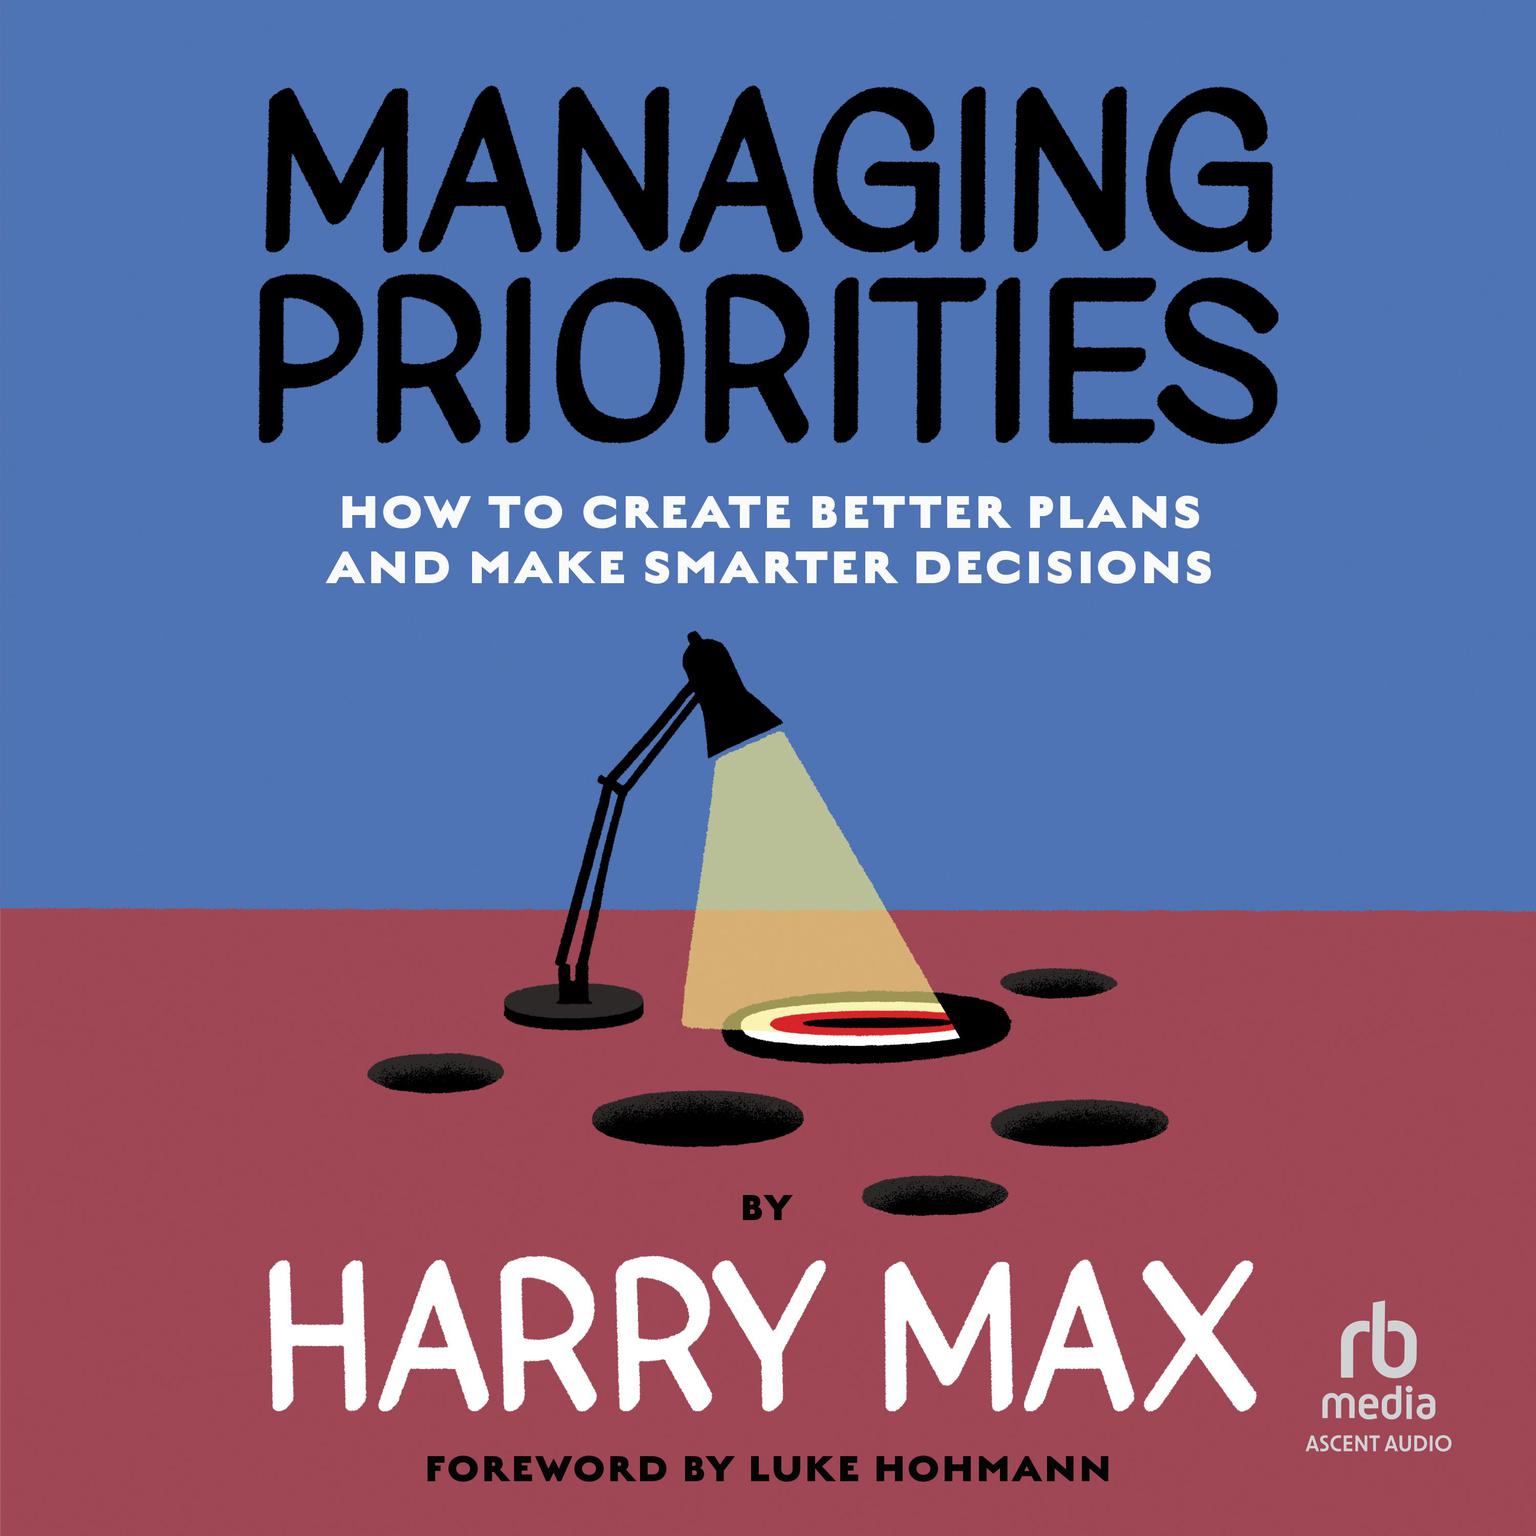 Managing Priorities: How to Create Better Plans and Make Smarter Decisions Audiobook, by Harry Max